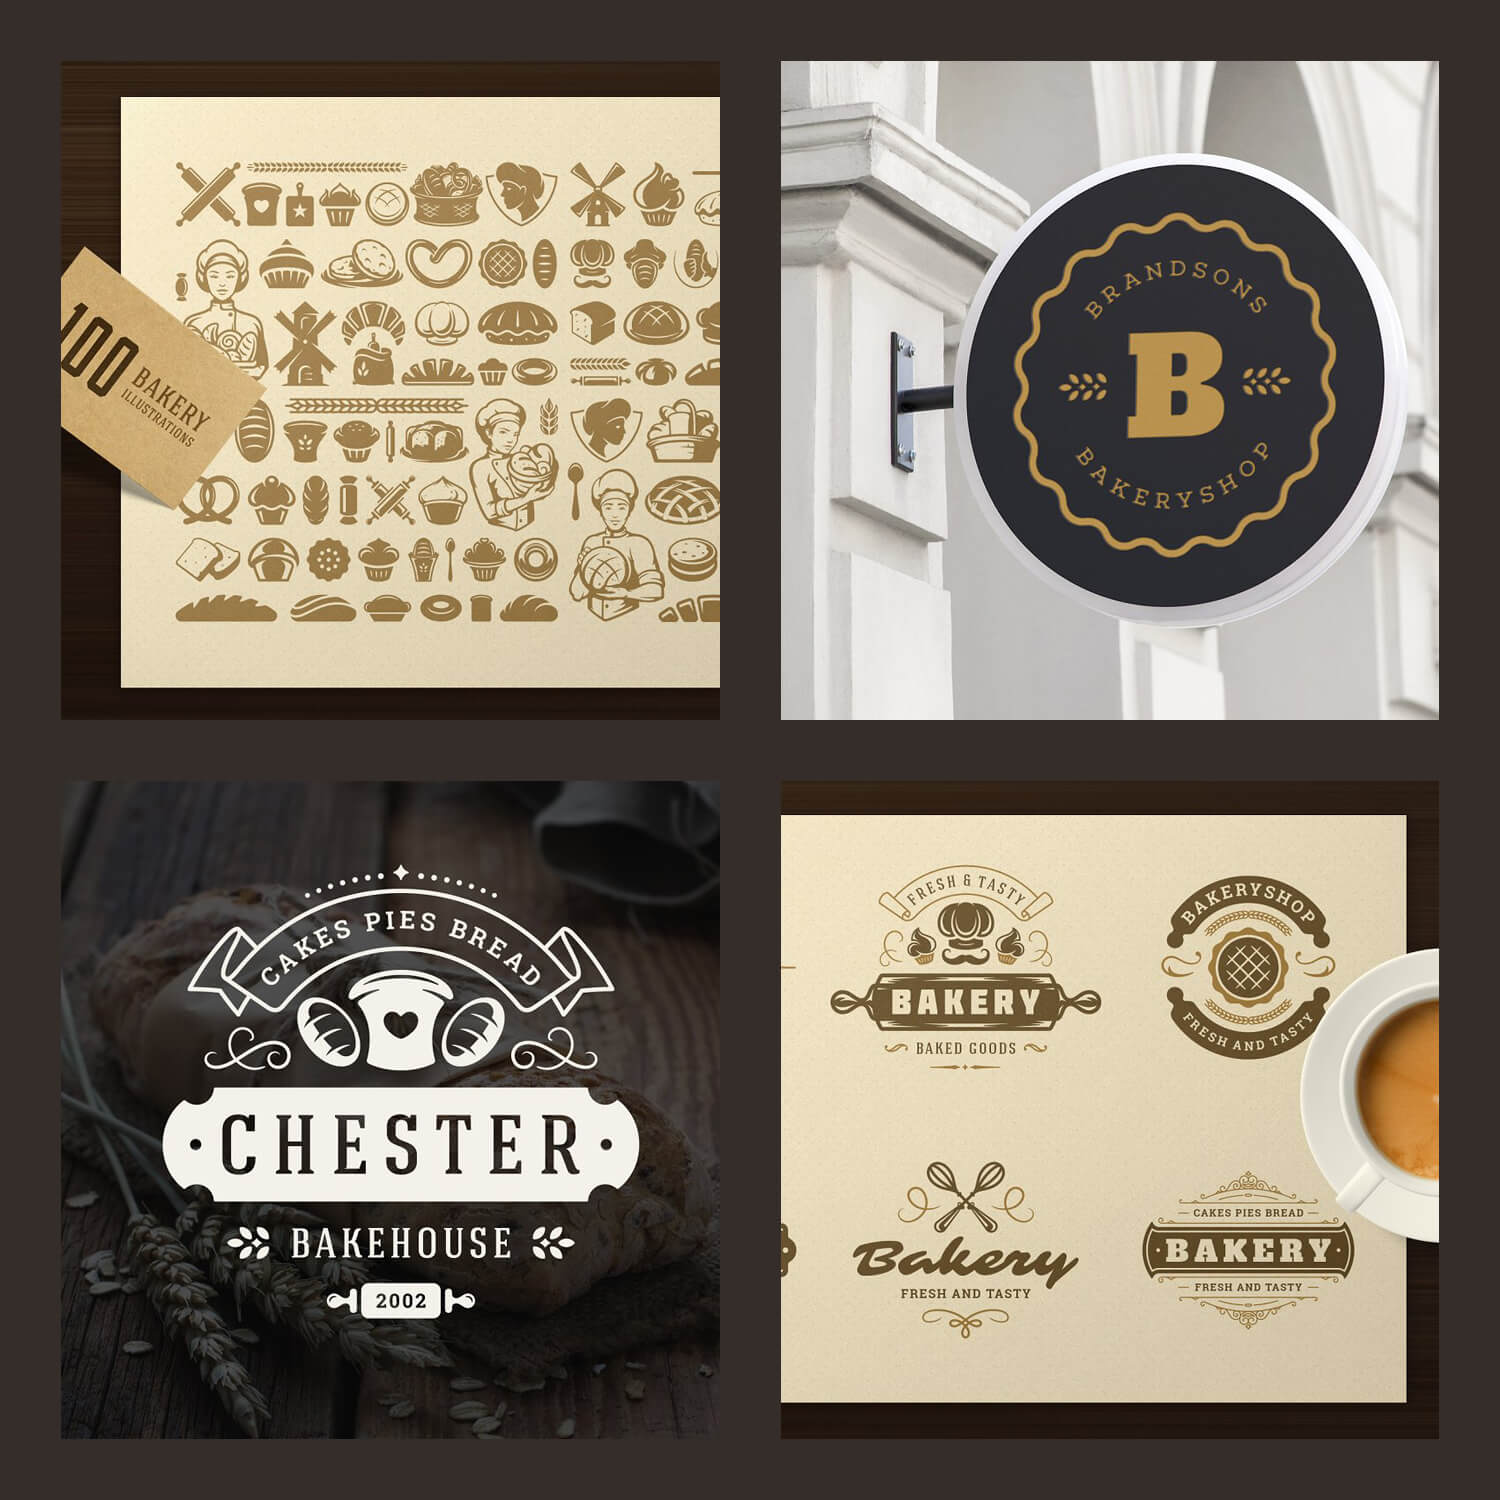 "Chester, Bakehouse 2002" logos and bakery icons in four pictures.